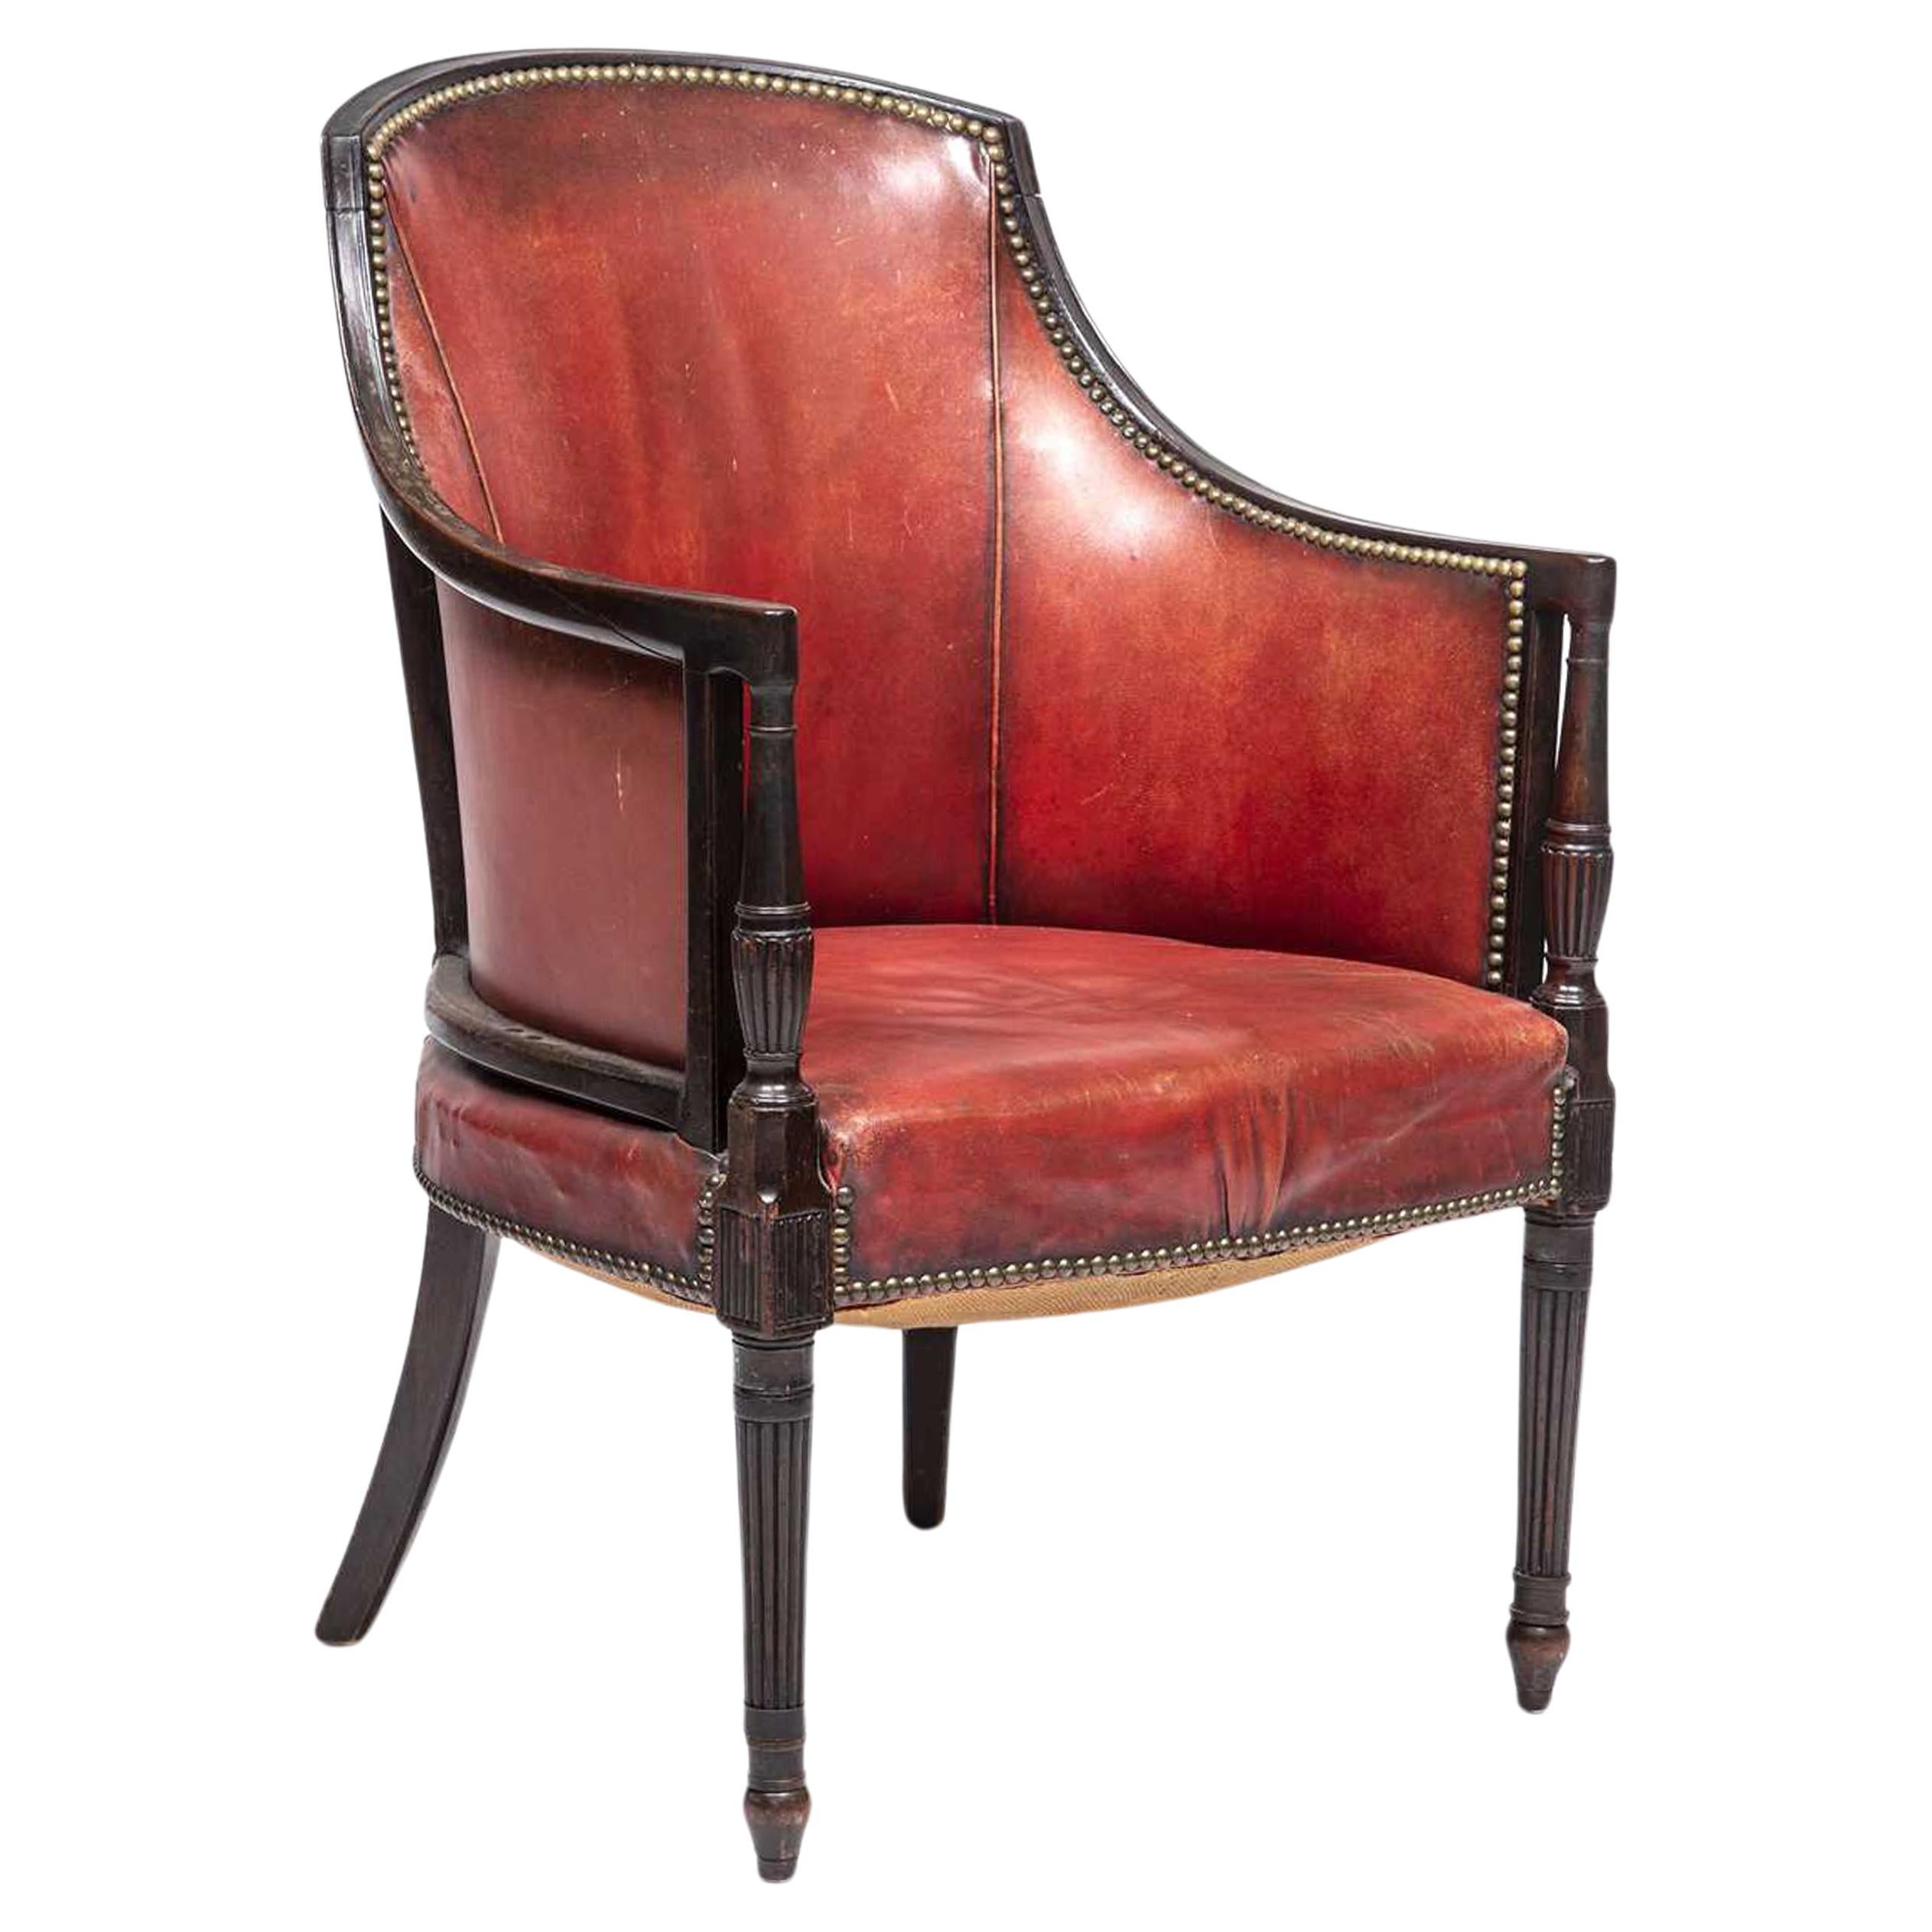 From The Oxford Library 19th Century Library Tub Chair Red Leather & Brass Studs For Sale